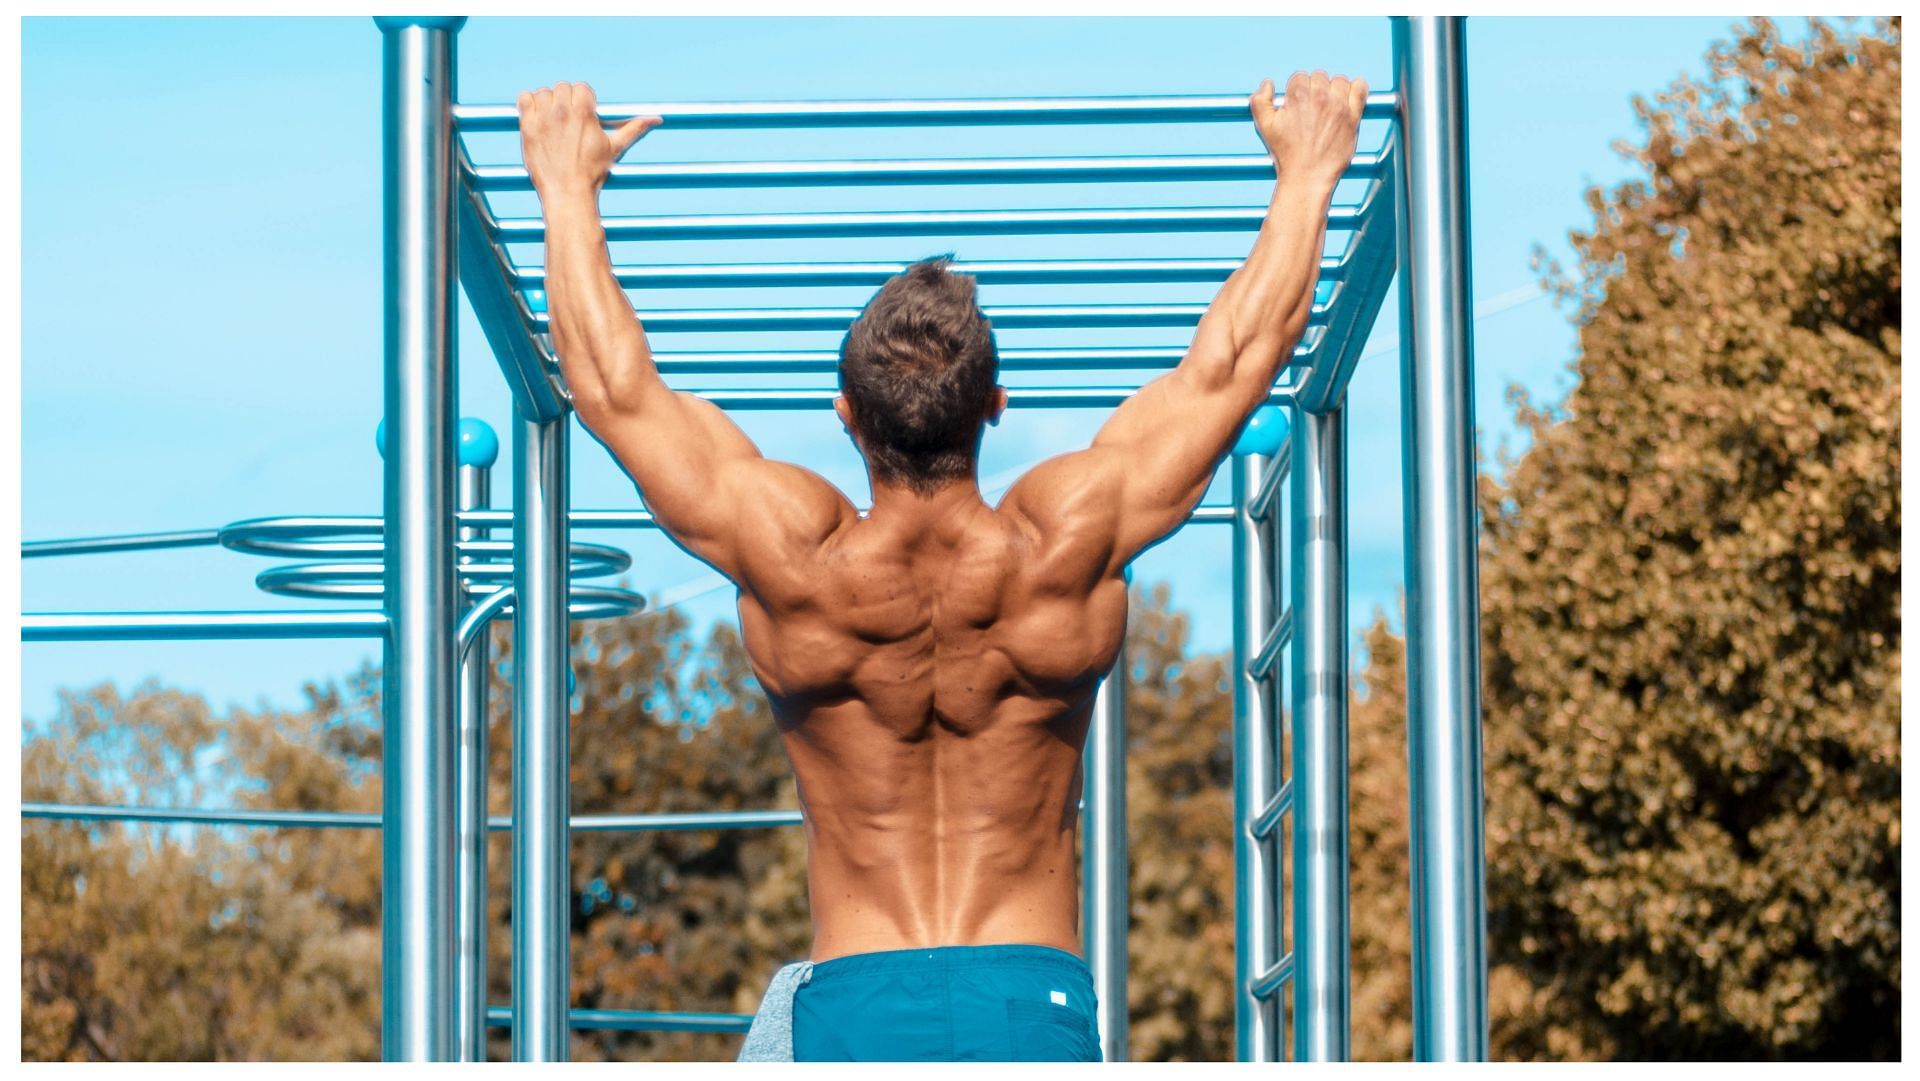 Best and effective pull-up bar exercises that women can do for strong core. (Image via Pexels/Omar Karakus)